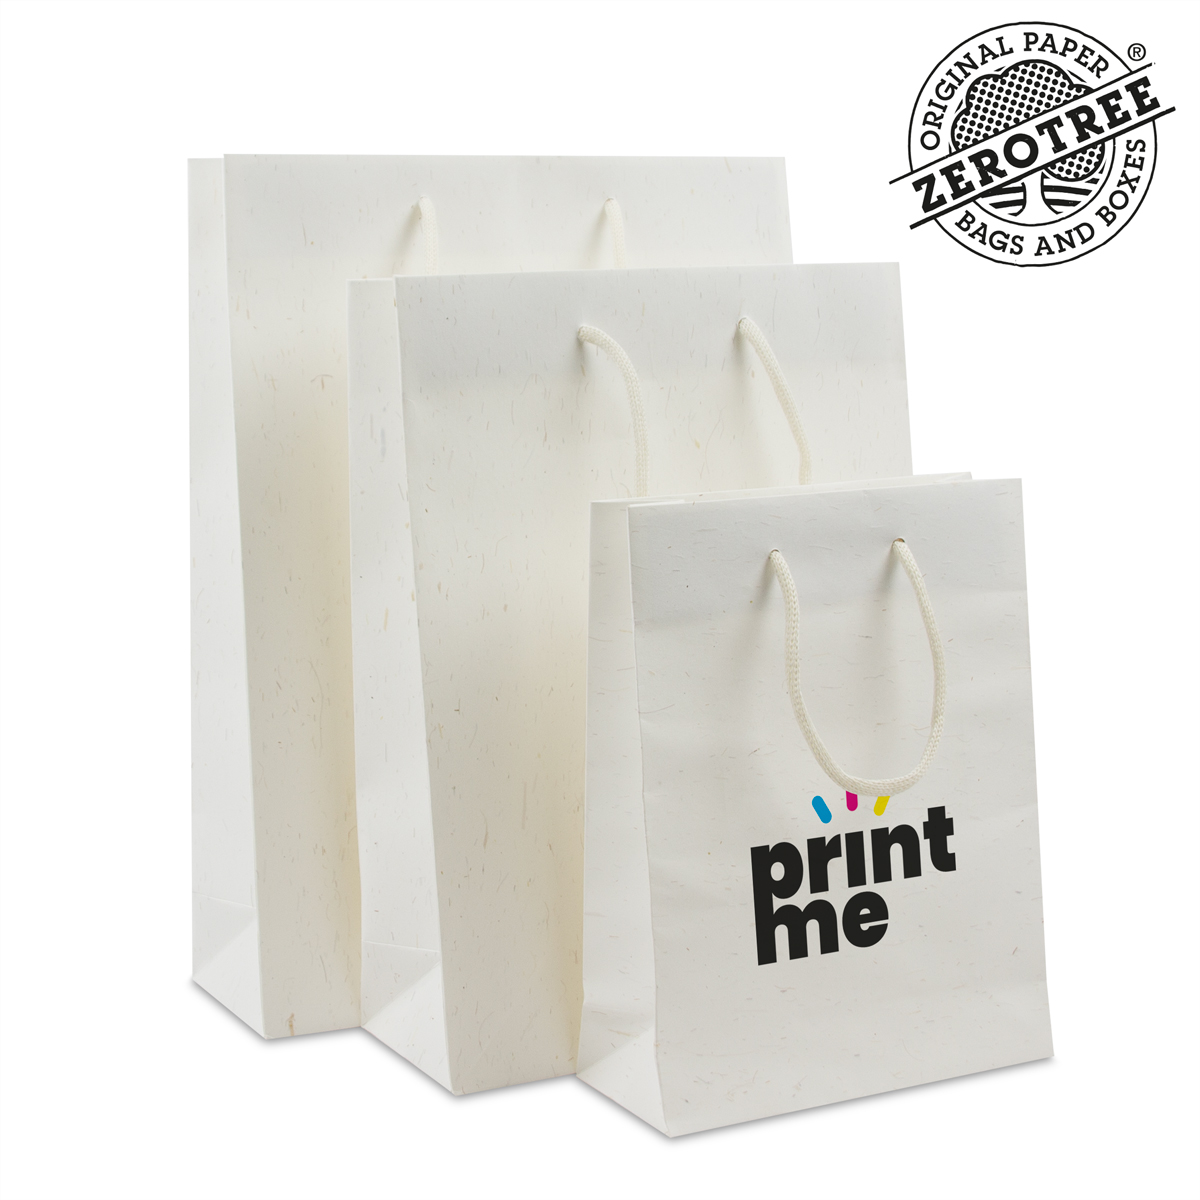 Luxury ZEROTREE® bags - Recycled cotton with straw fibers